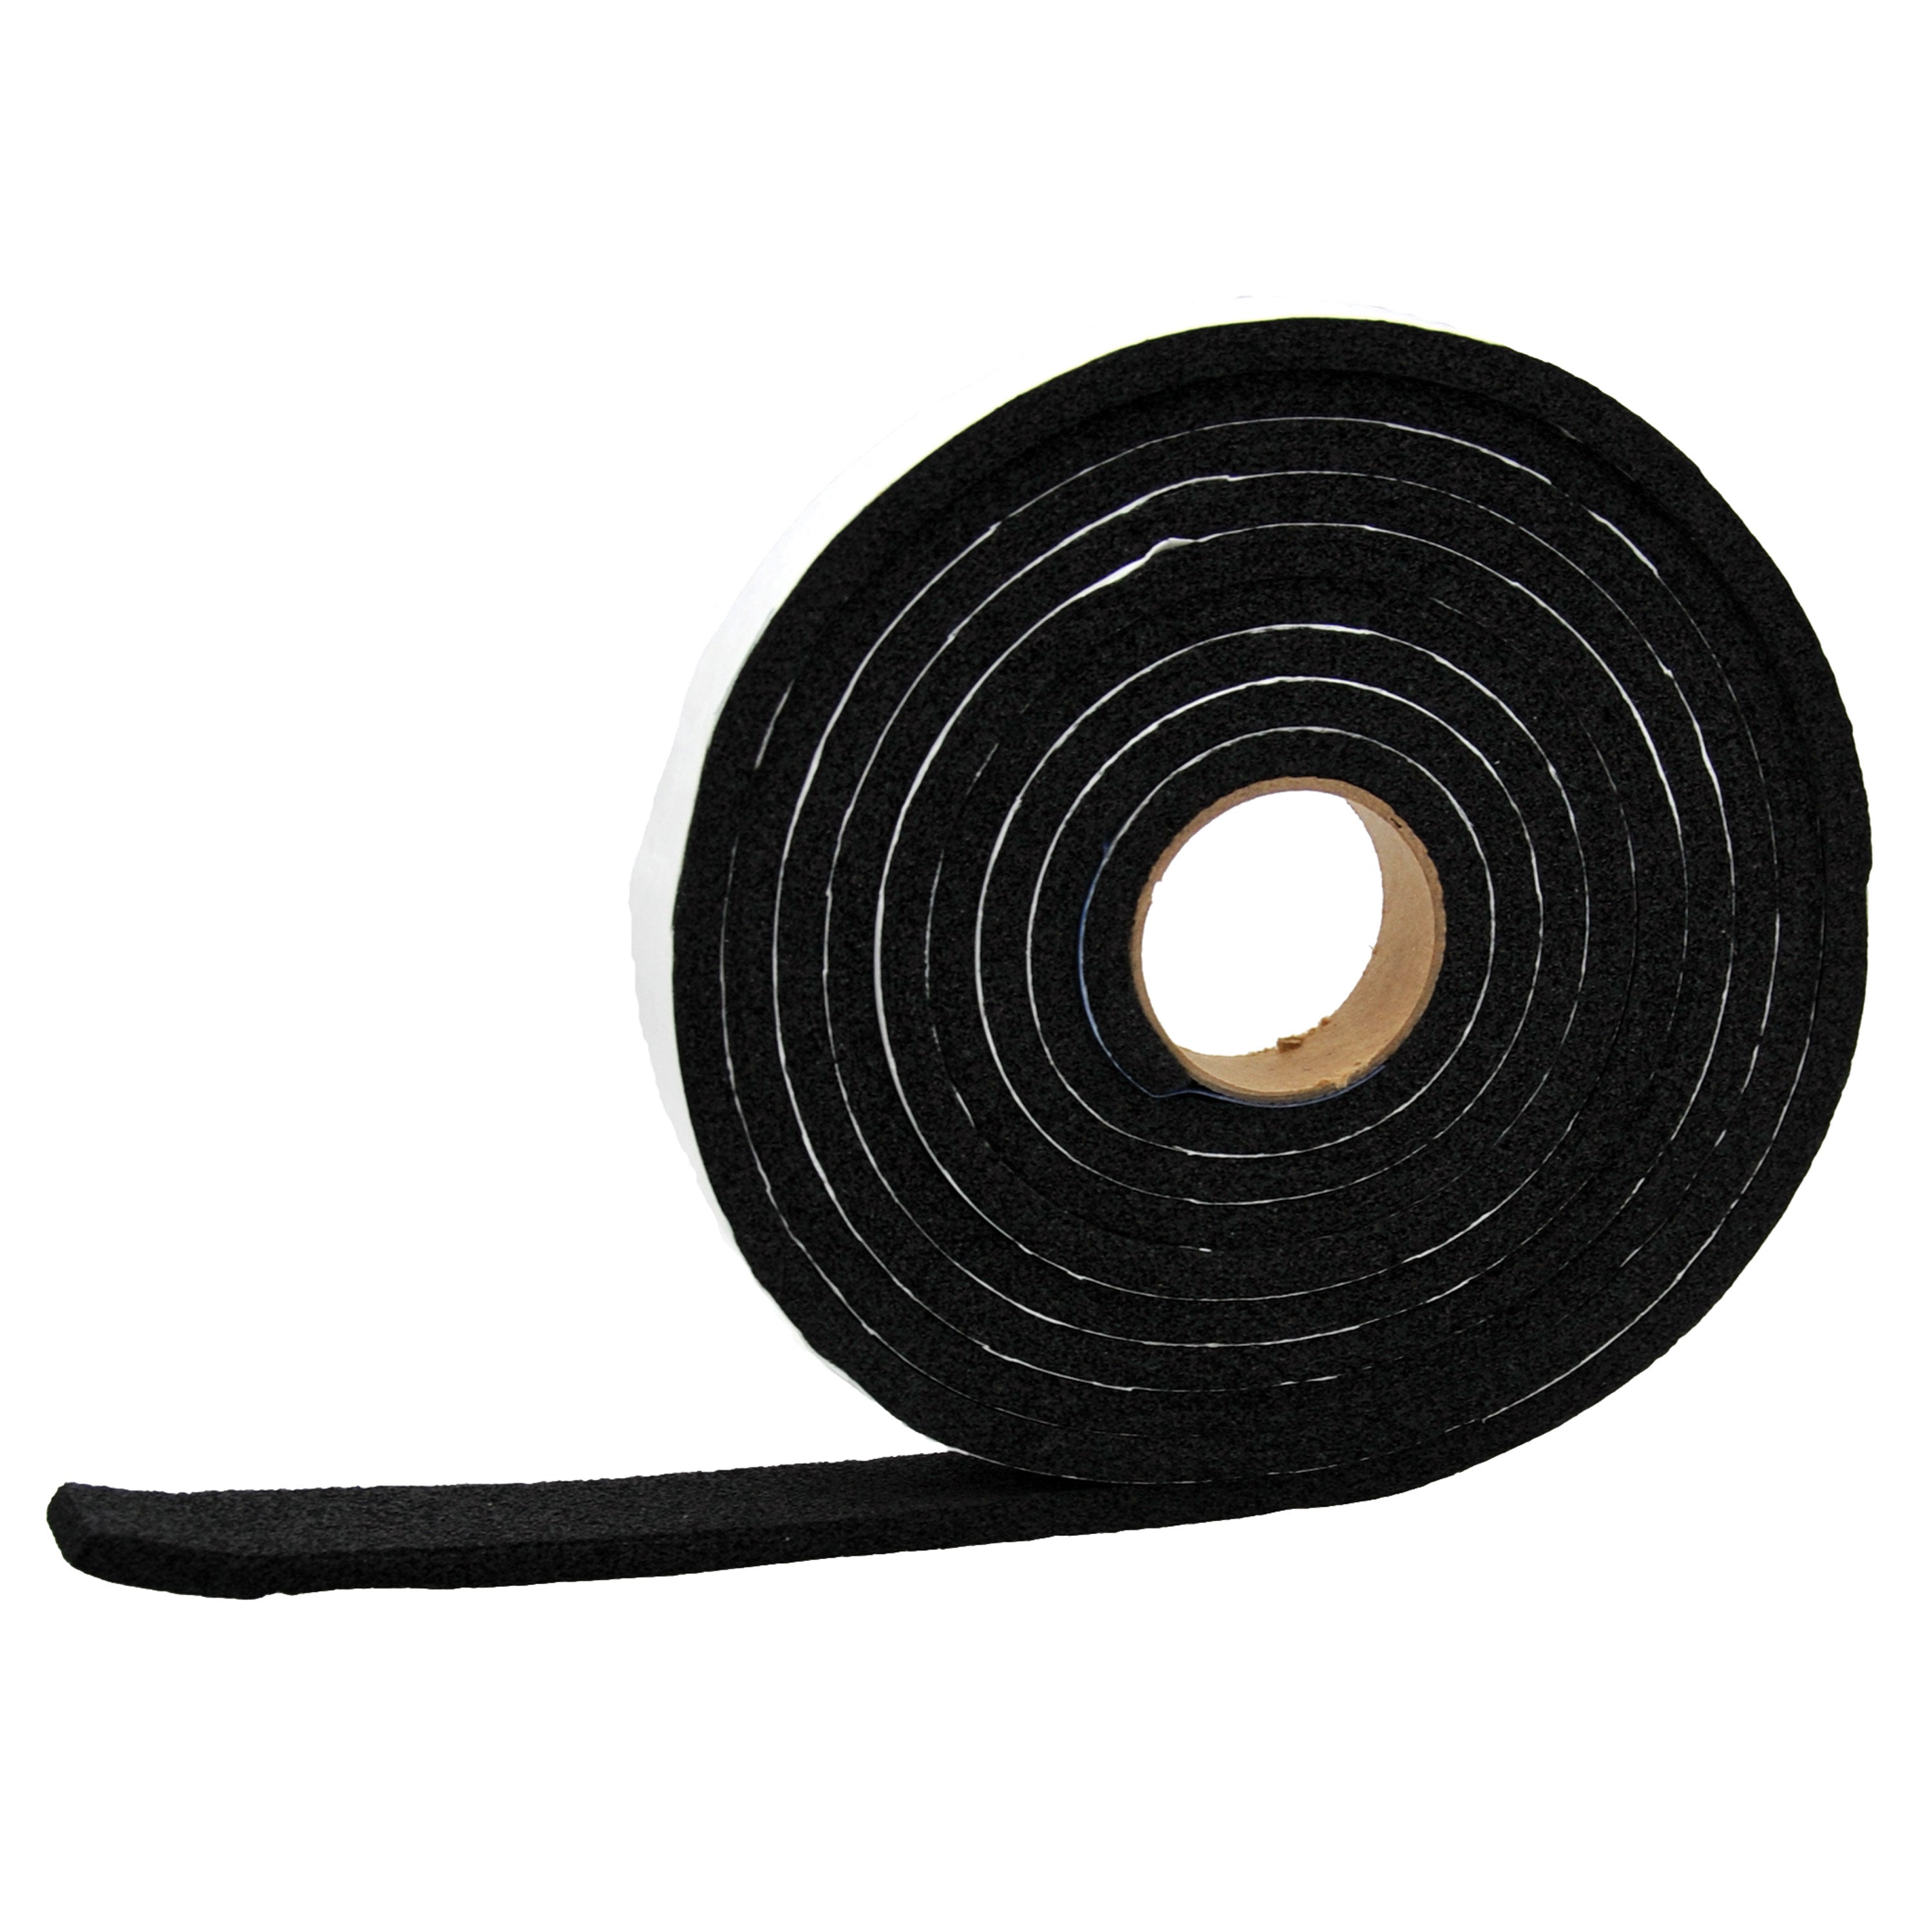 AP Products 018-3161210 Weather Stripping - 3/16" x 1/2" x 10'